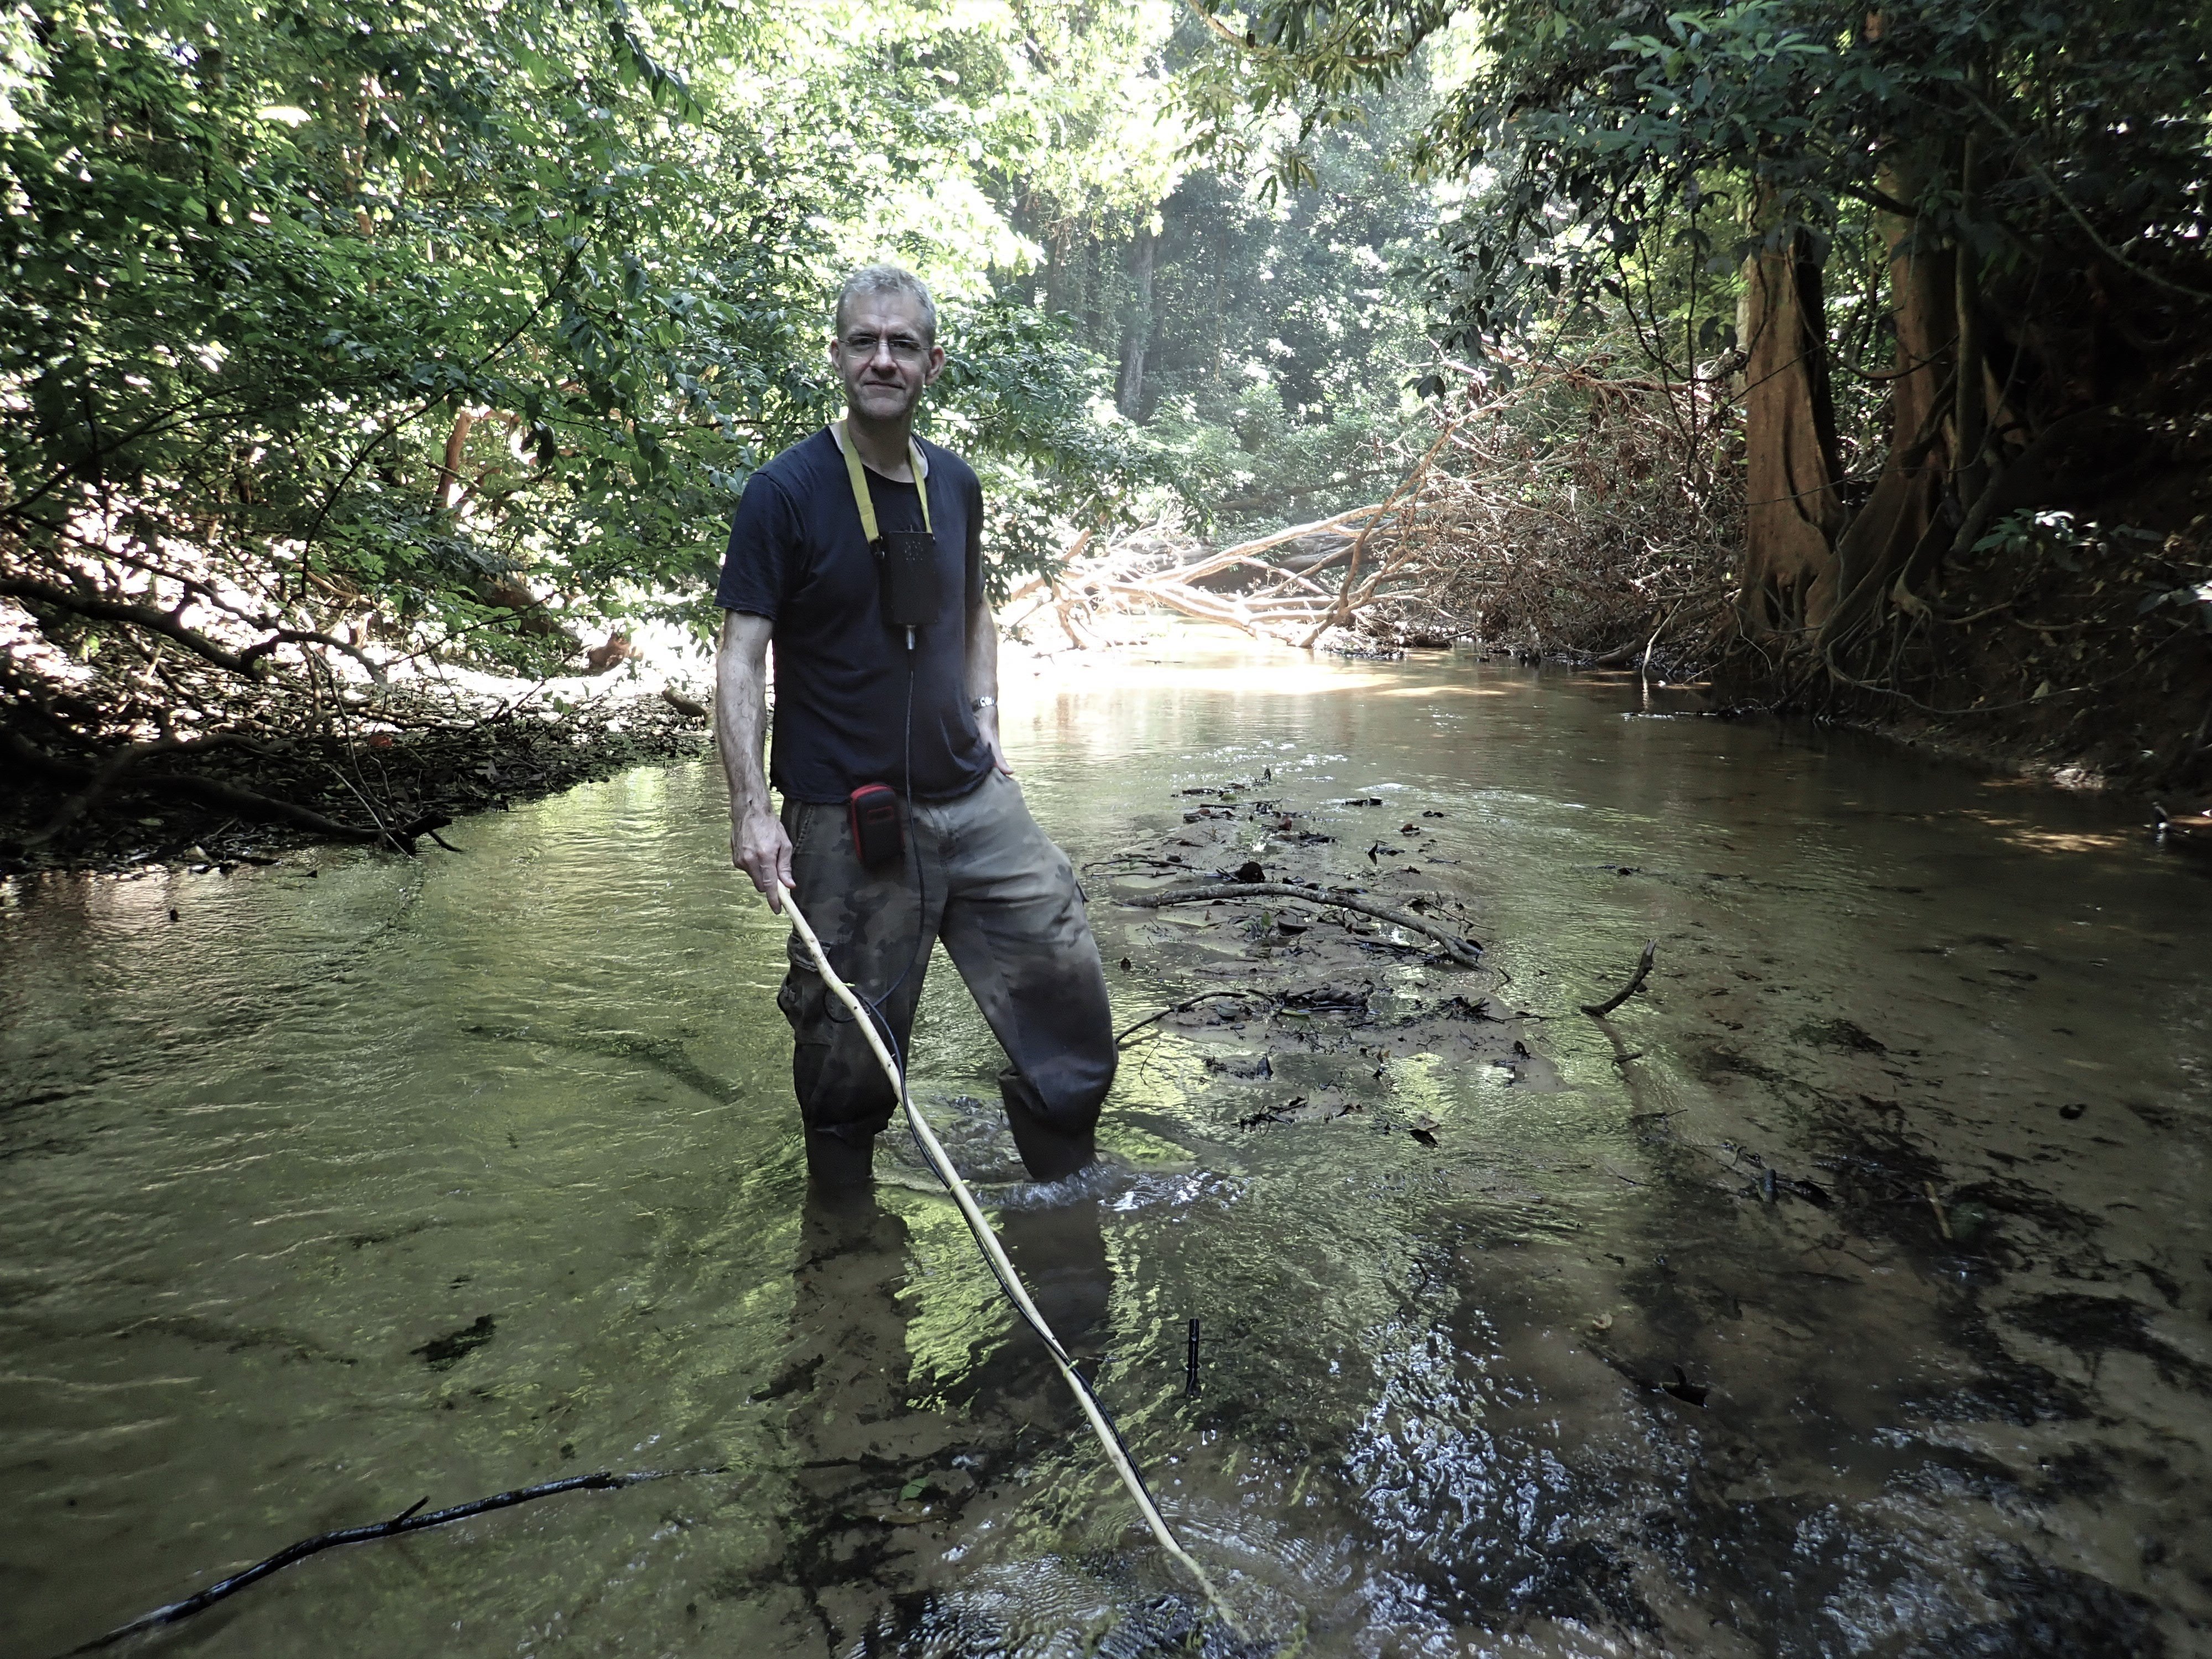 Professor Crampton uses a fishfinder to locate electric eels in the Amazon.